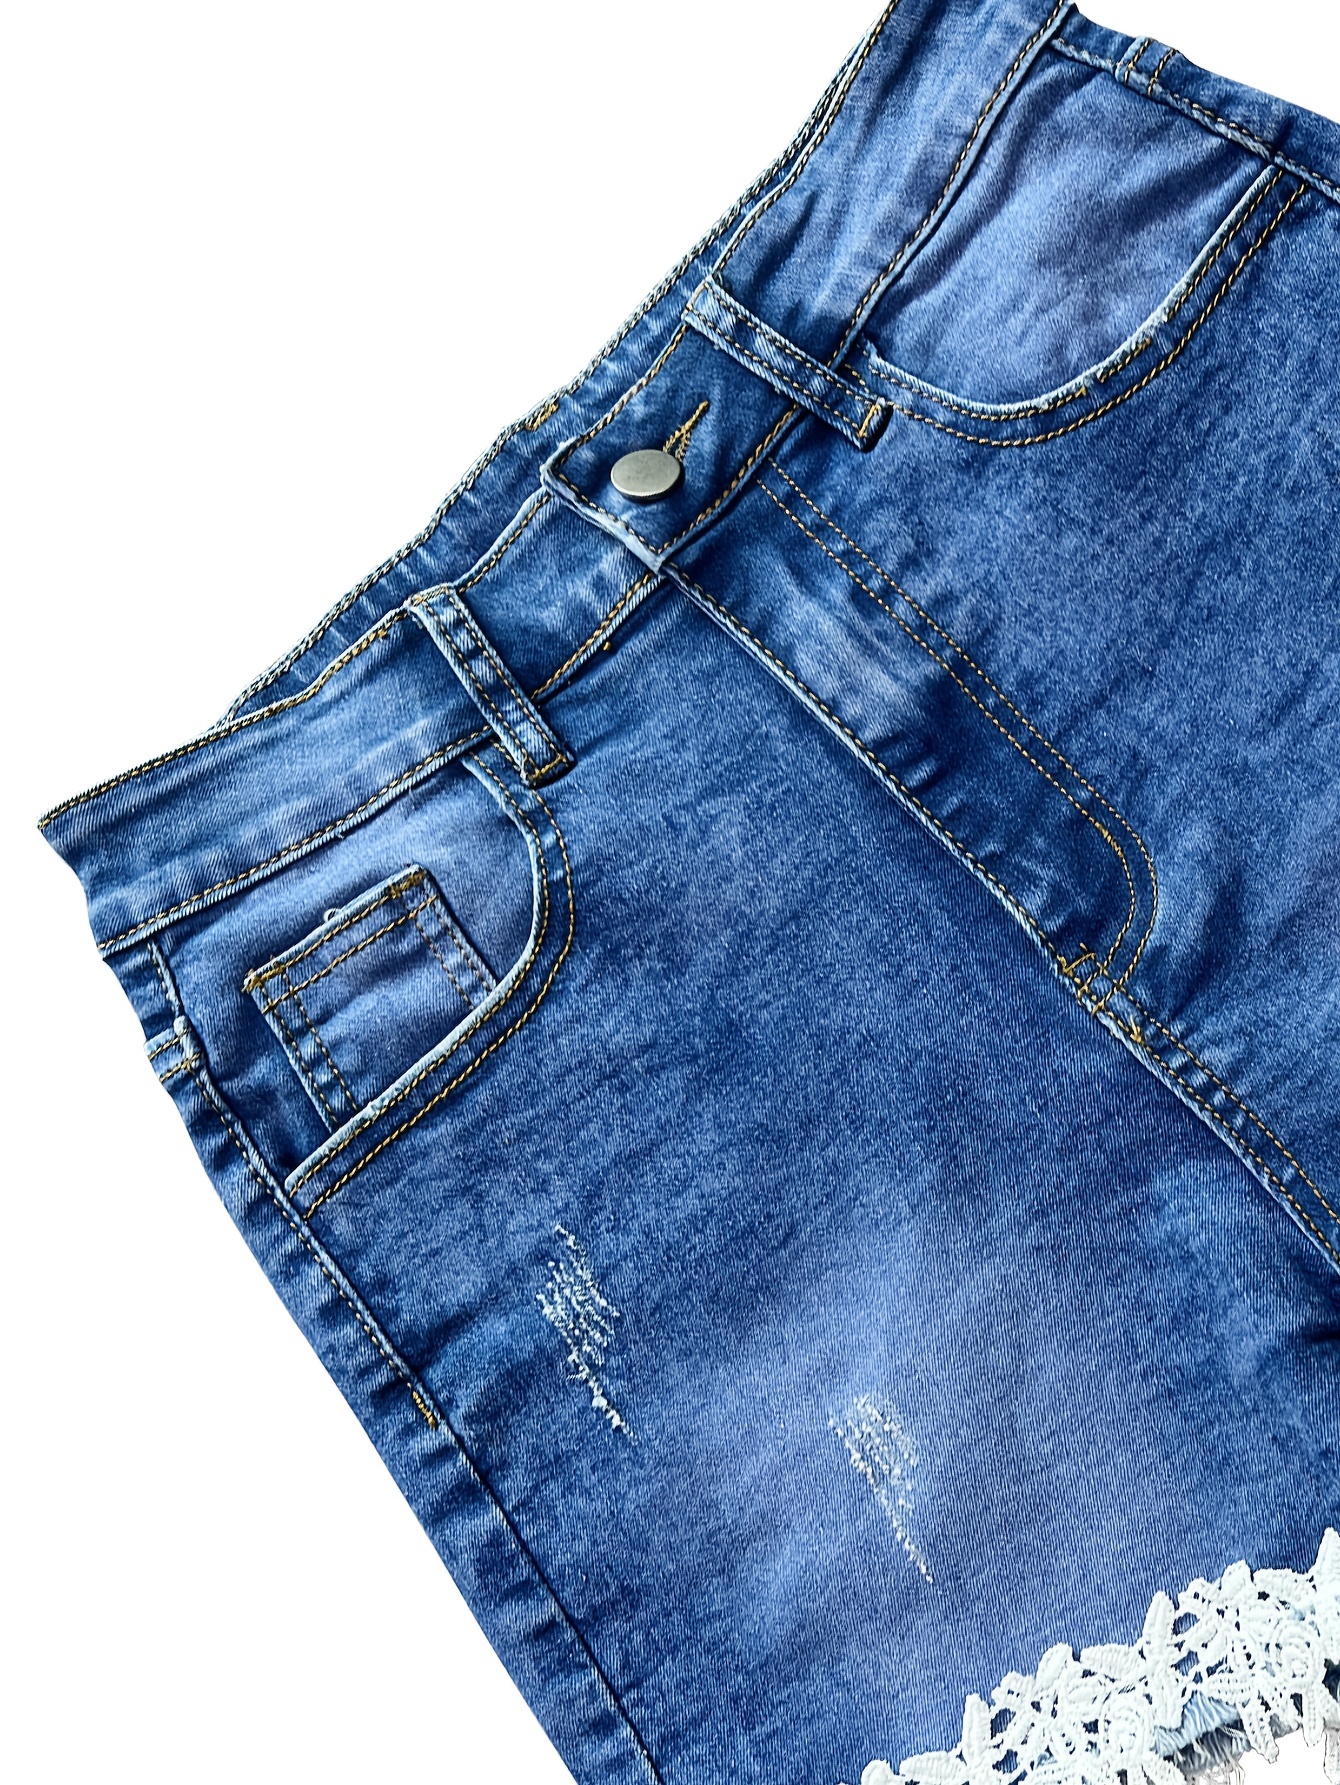 Zipper or Buttons for Denim Jeans: Which Should I Choose?